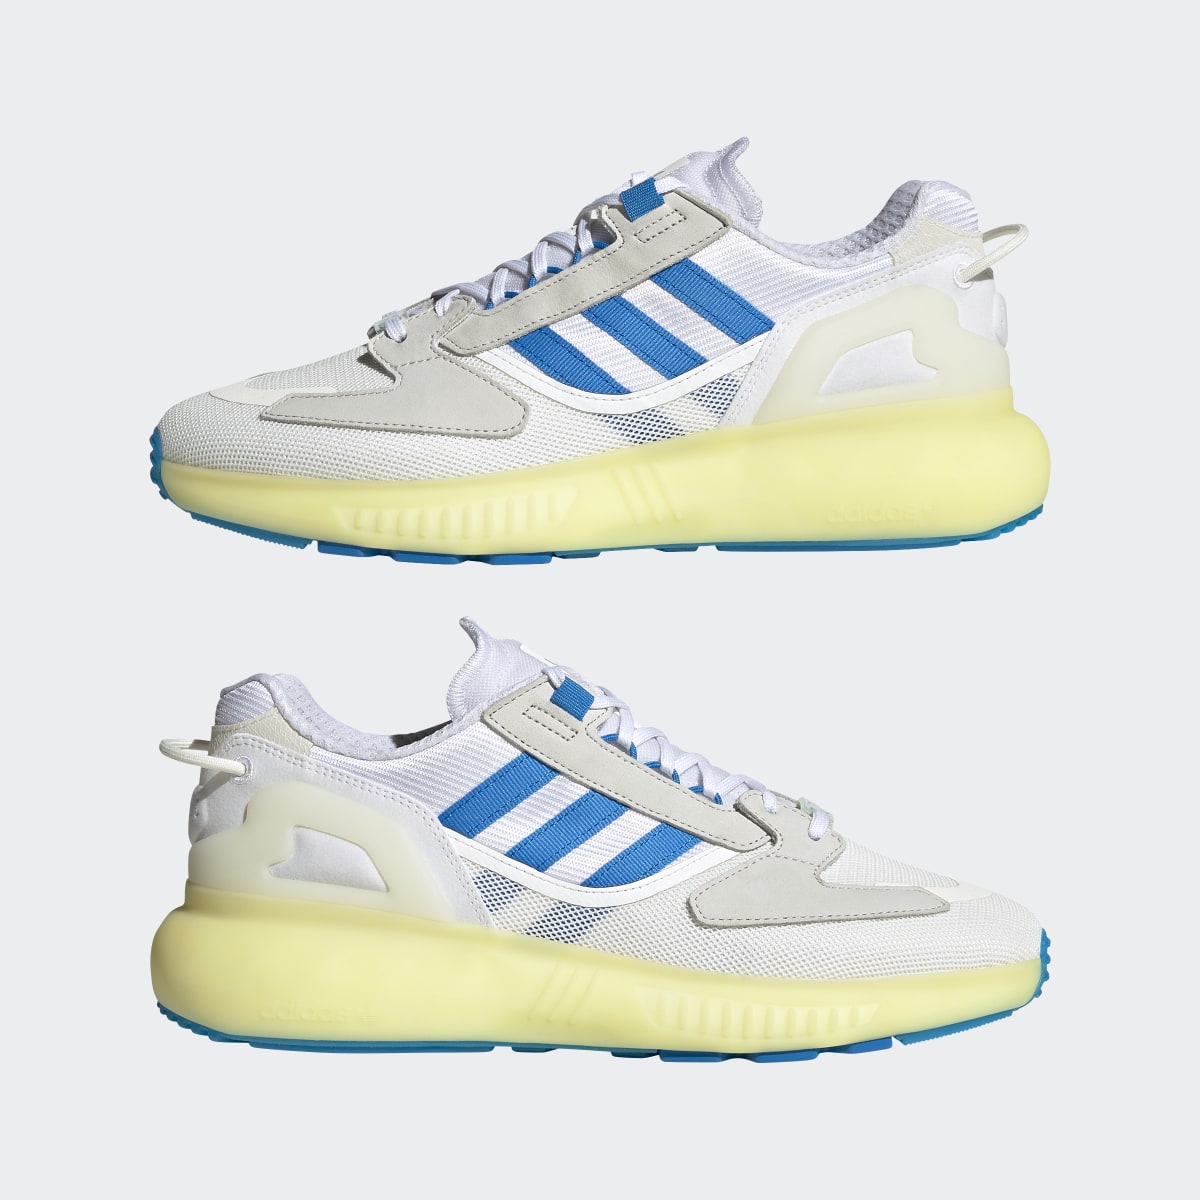 Adidas ZX 5K BOOST Shoes. 8